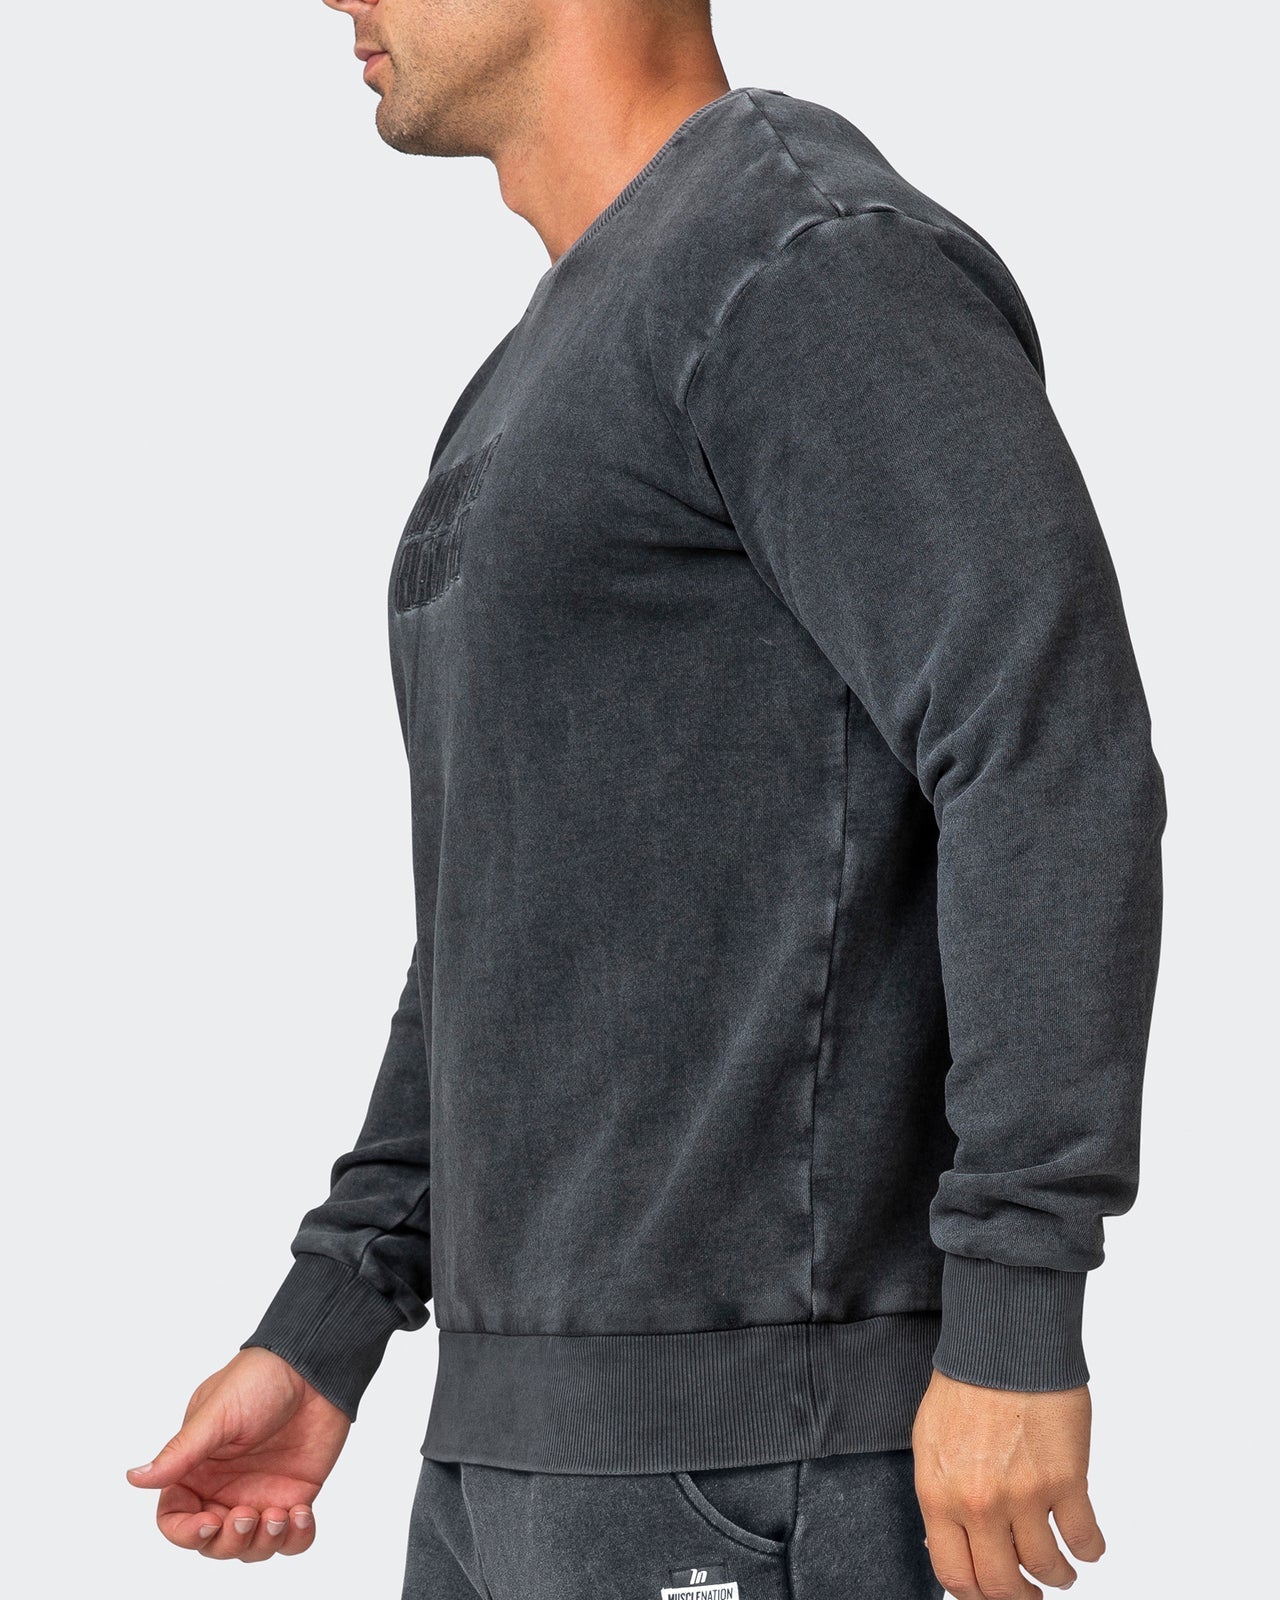 musclenation Mens Classic Vintage Pullover - Washed Black